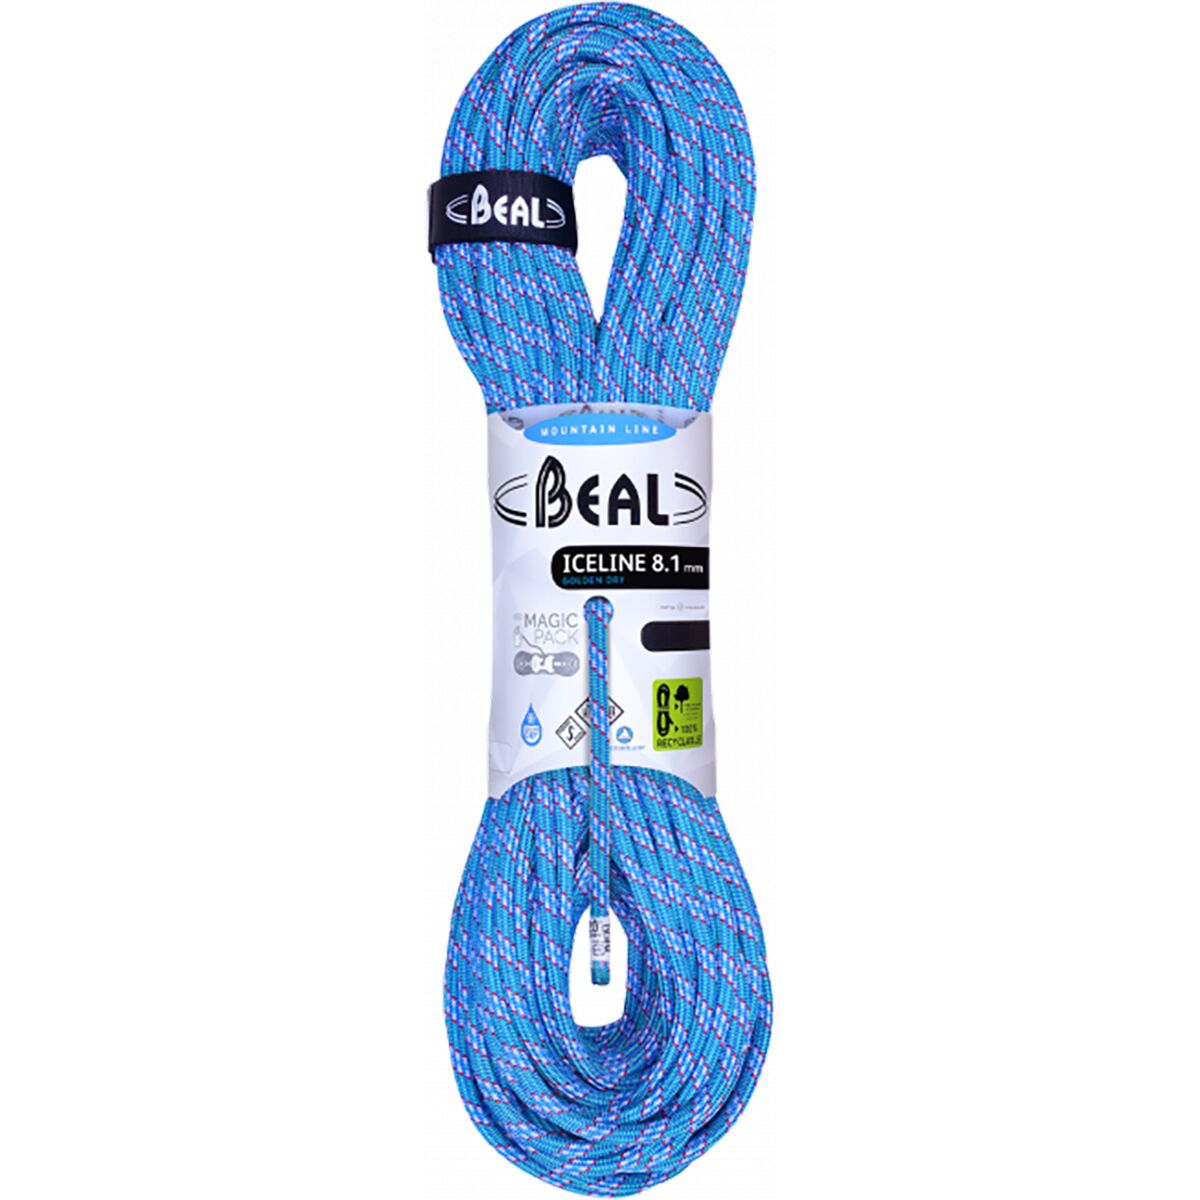 Beal Ice Line Dry Cover Unicore Half Rope - 8.1mm